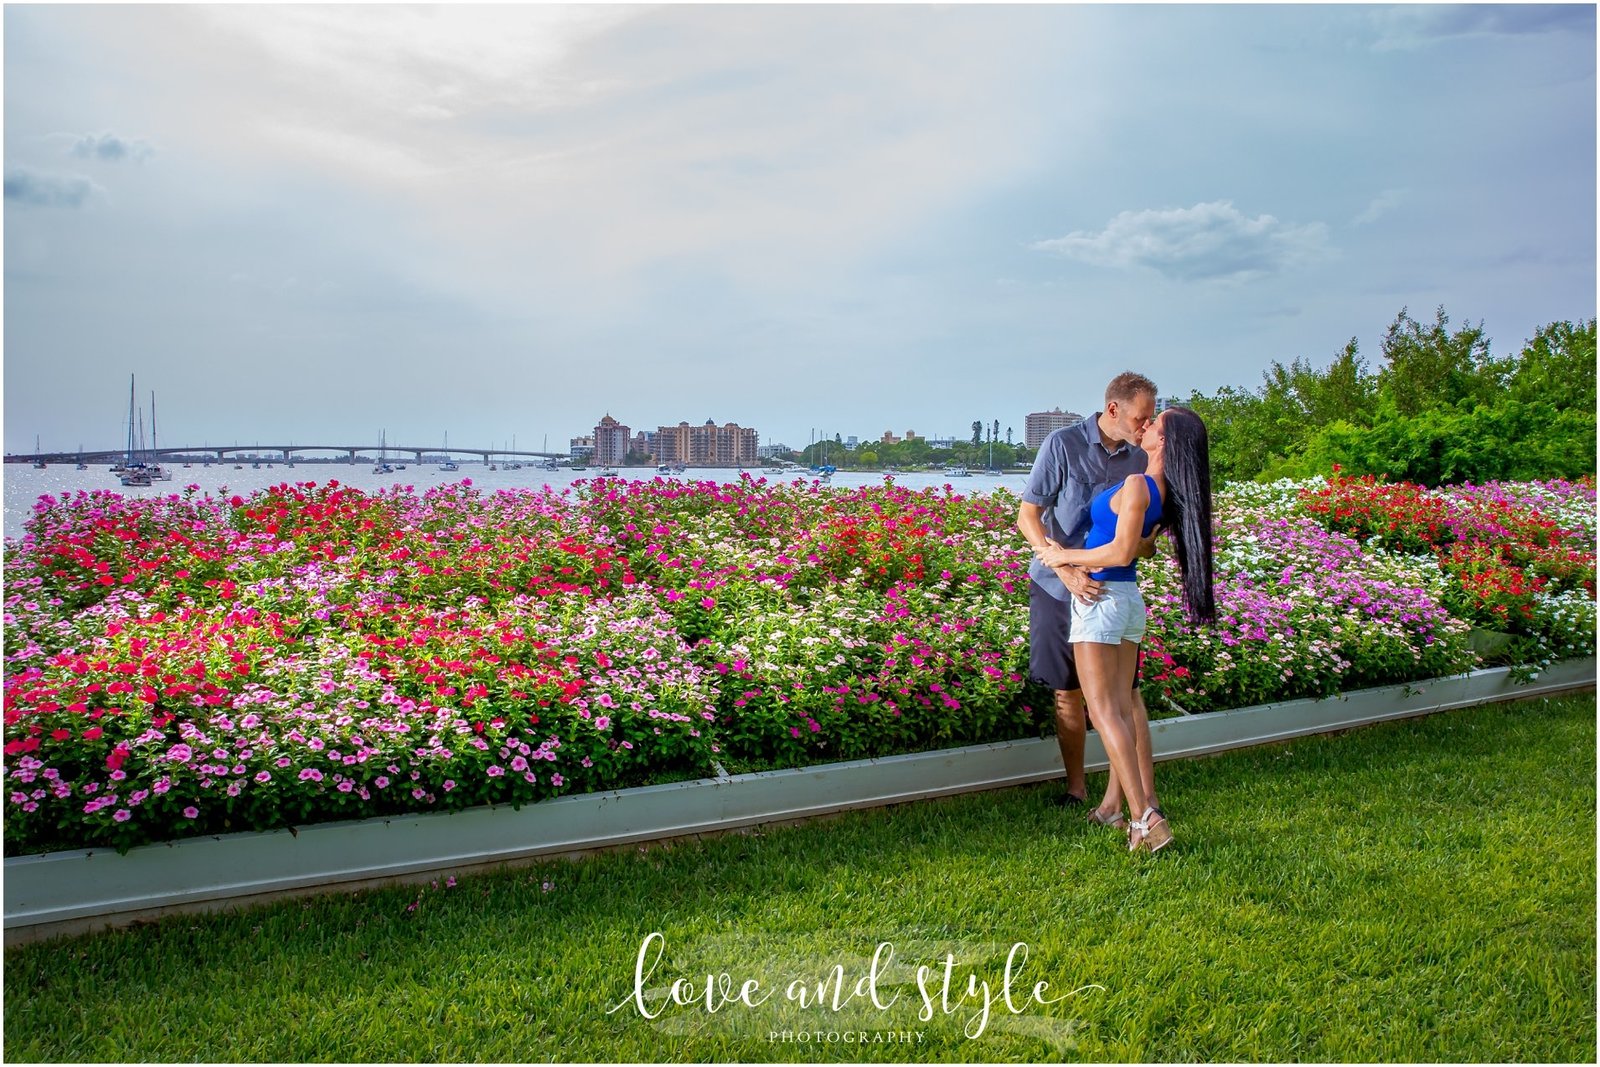 Engagement Photography at Selby Gardens in front of the flower beds with couple embracing and kissing